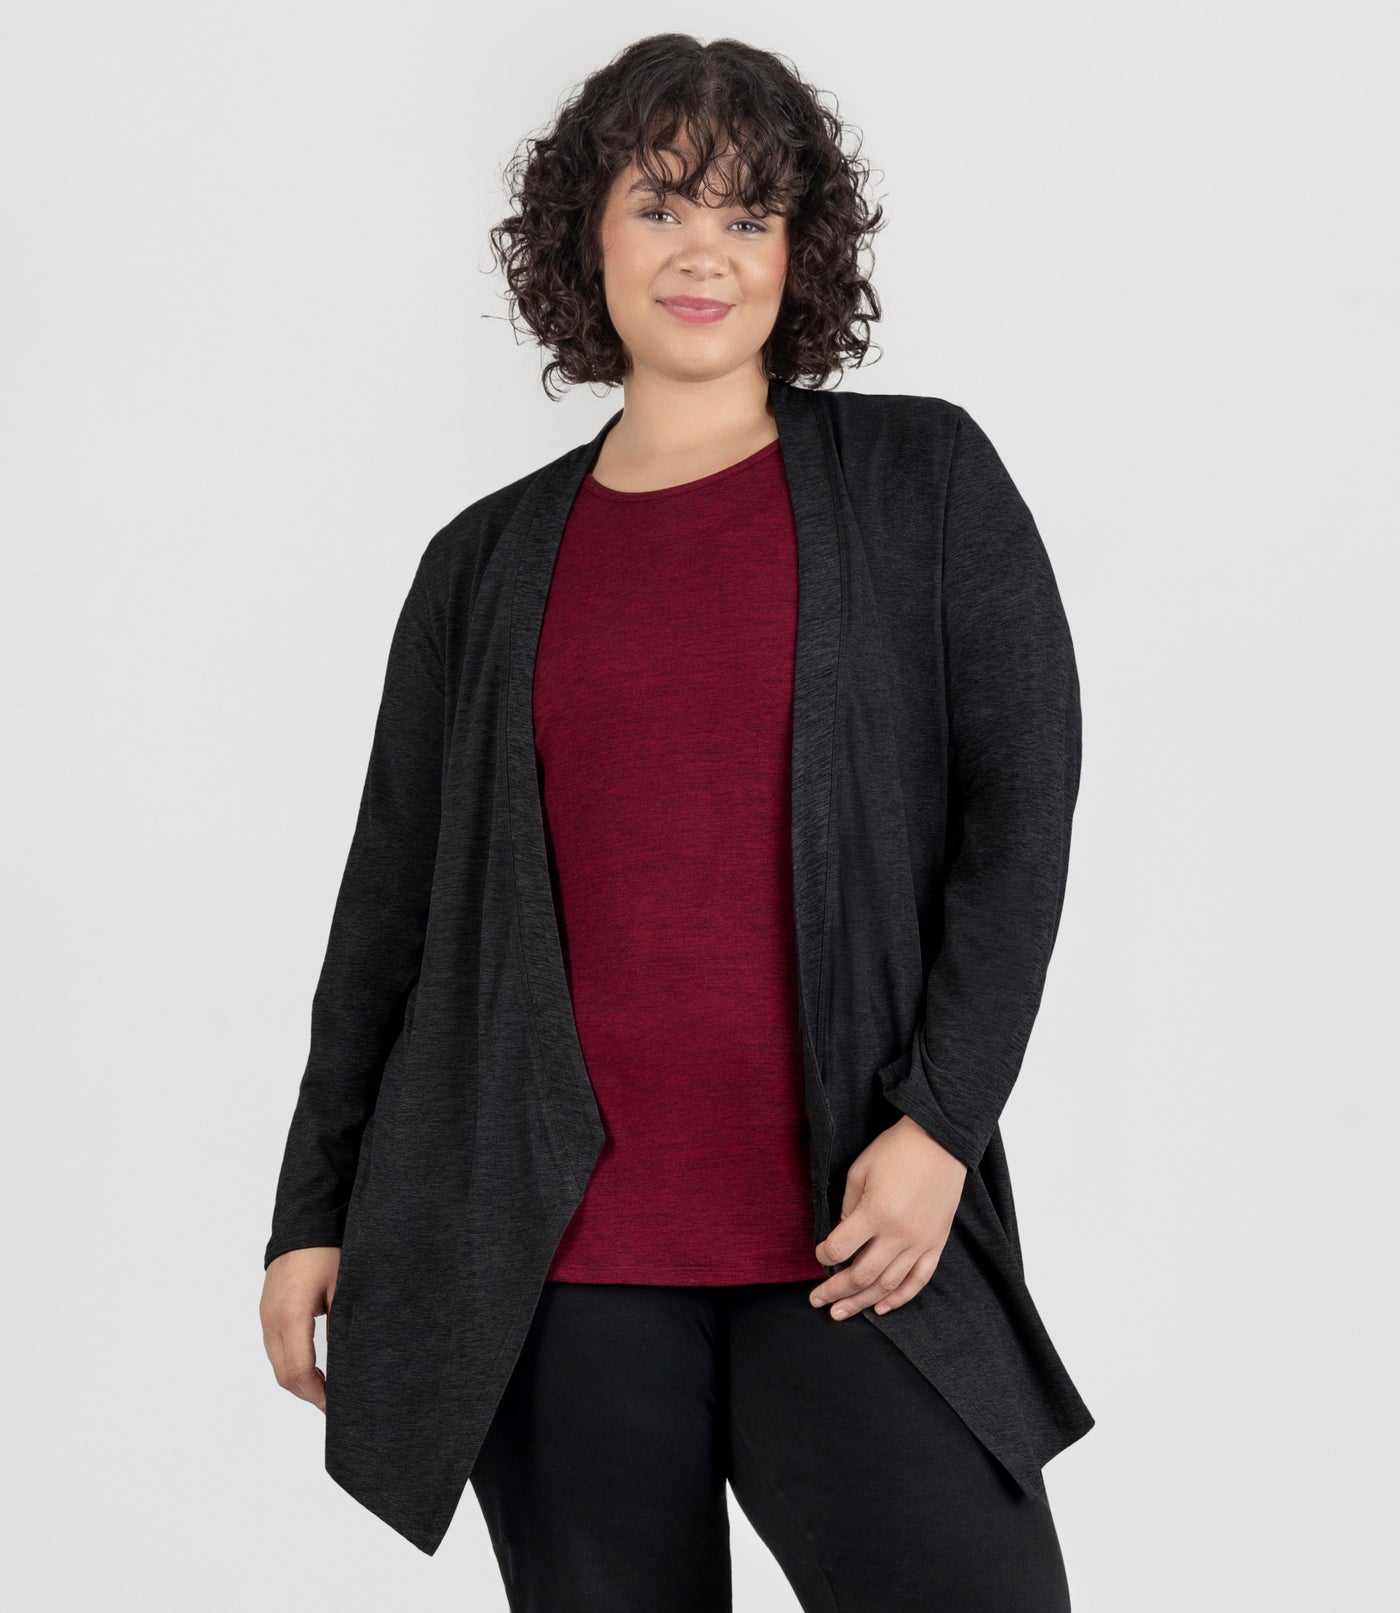 JunoActive Model, facing front, wearing SoftSupreme Cardigan in Heather Black, hands by her side.